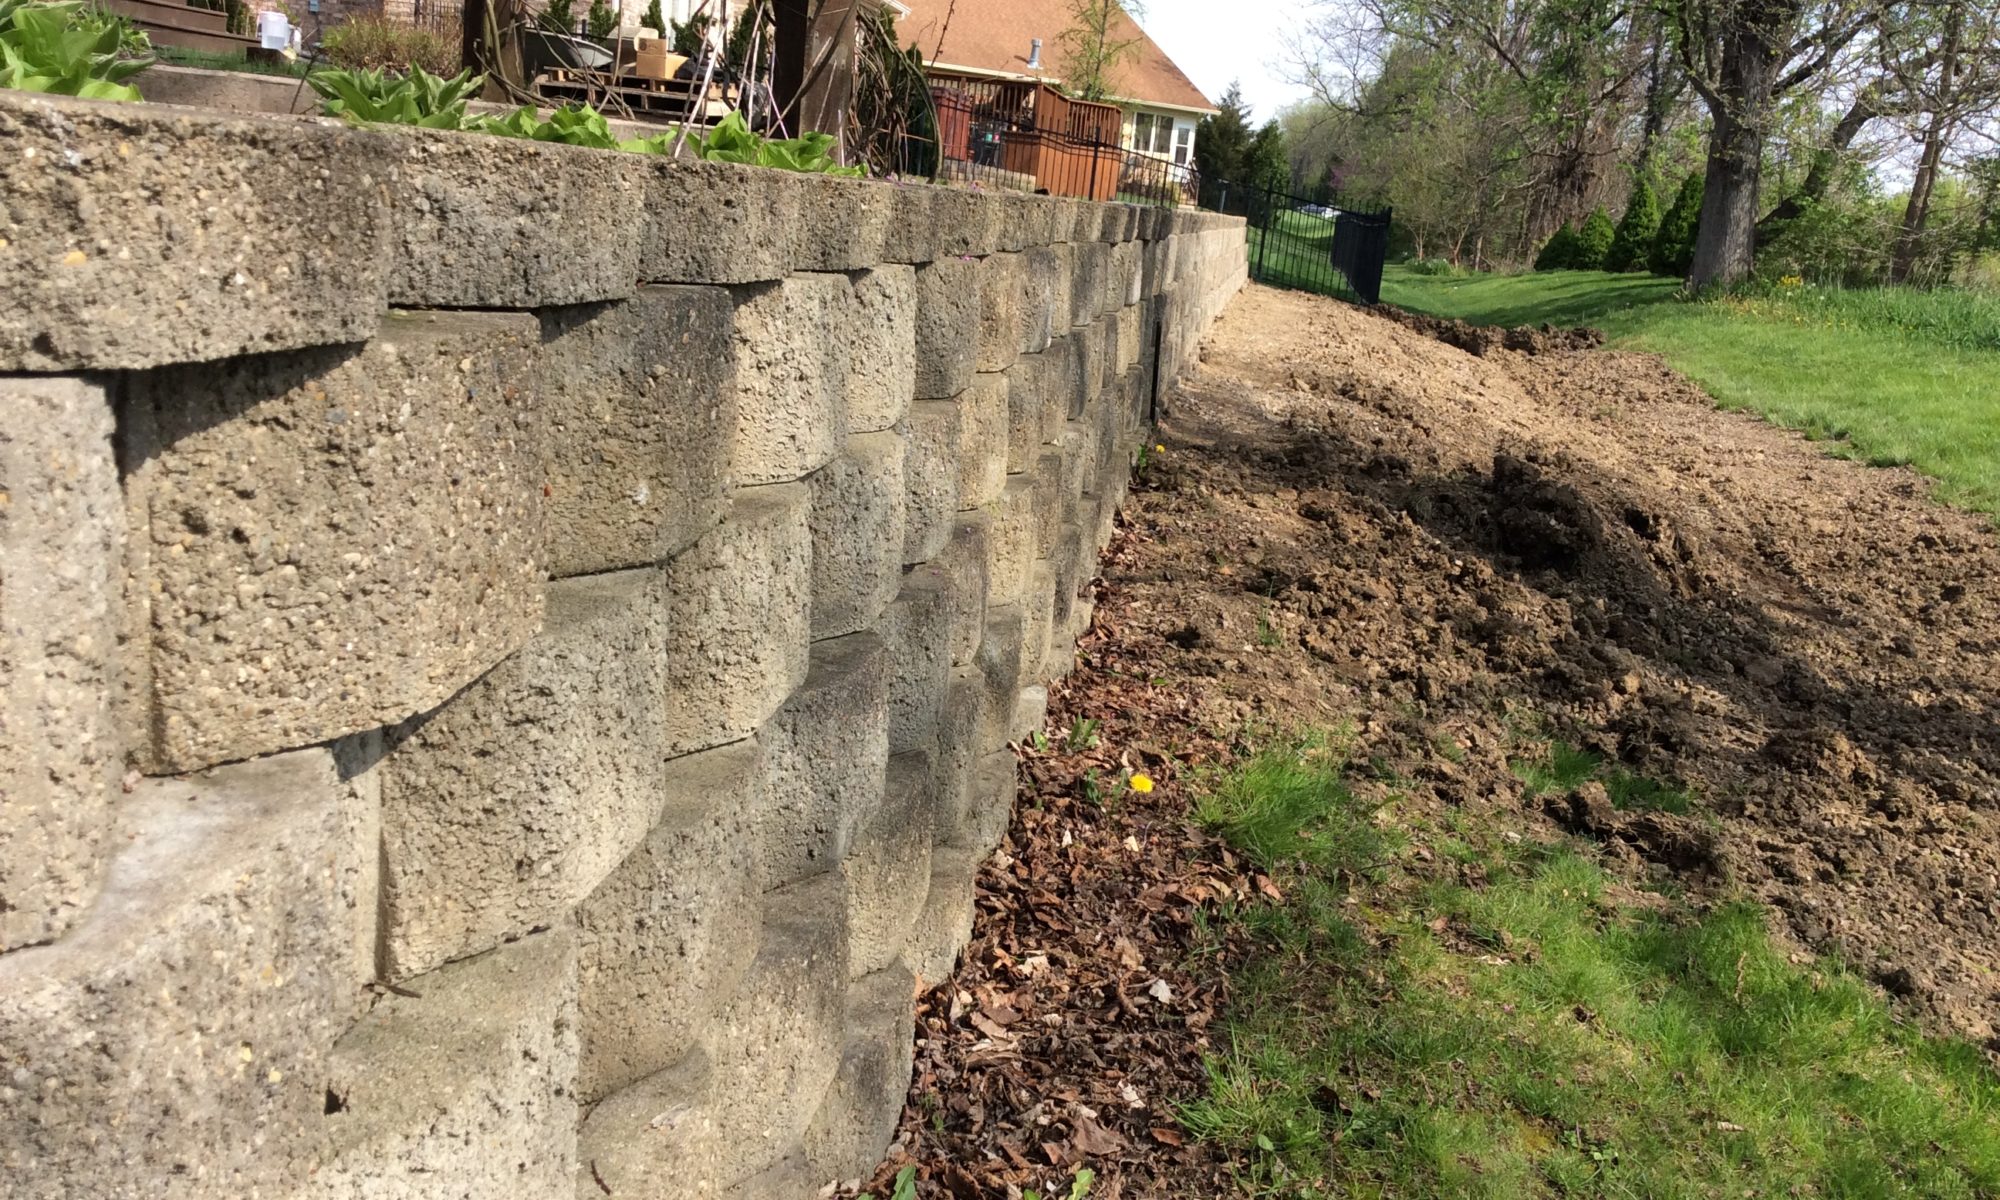 Precision Outdoors Zionsville Retaining Wall rejuvenate existing landscaping indiana refresh backyard side yard